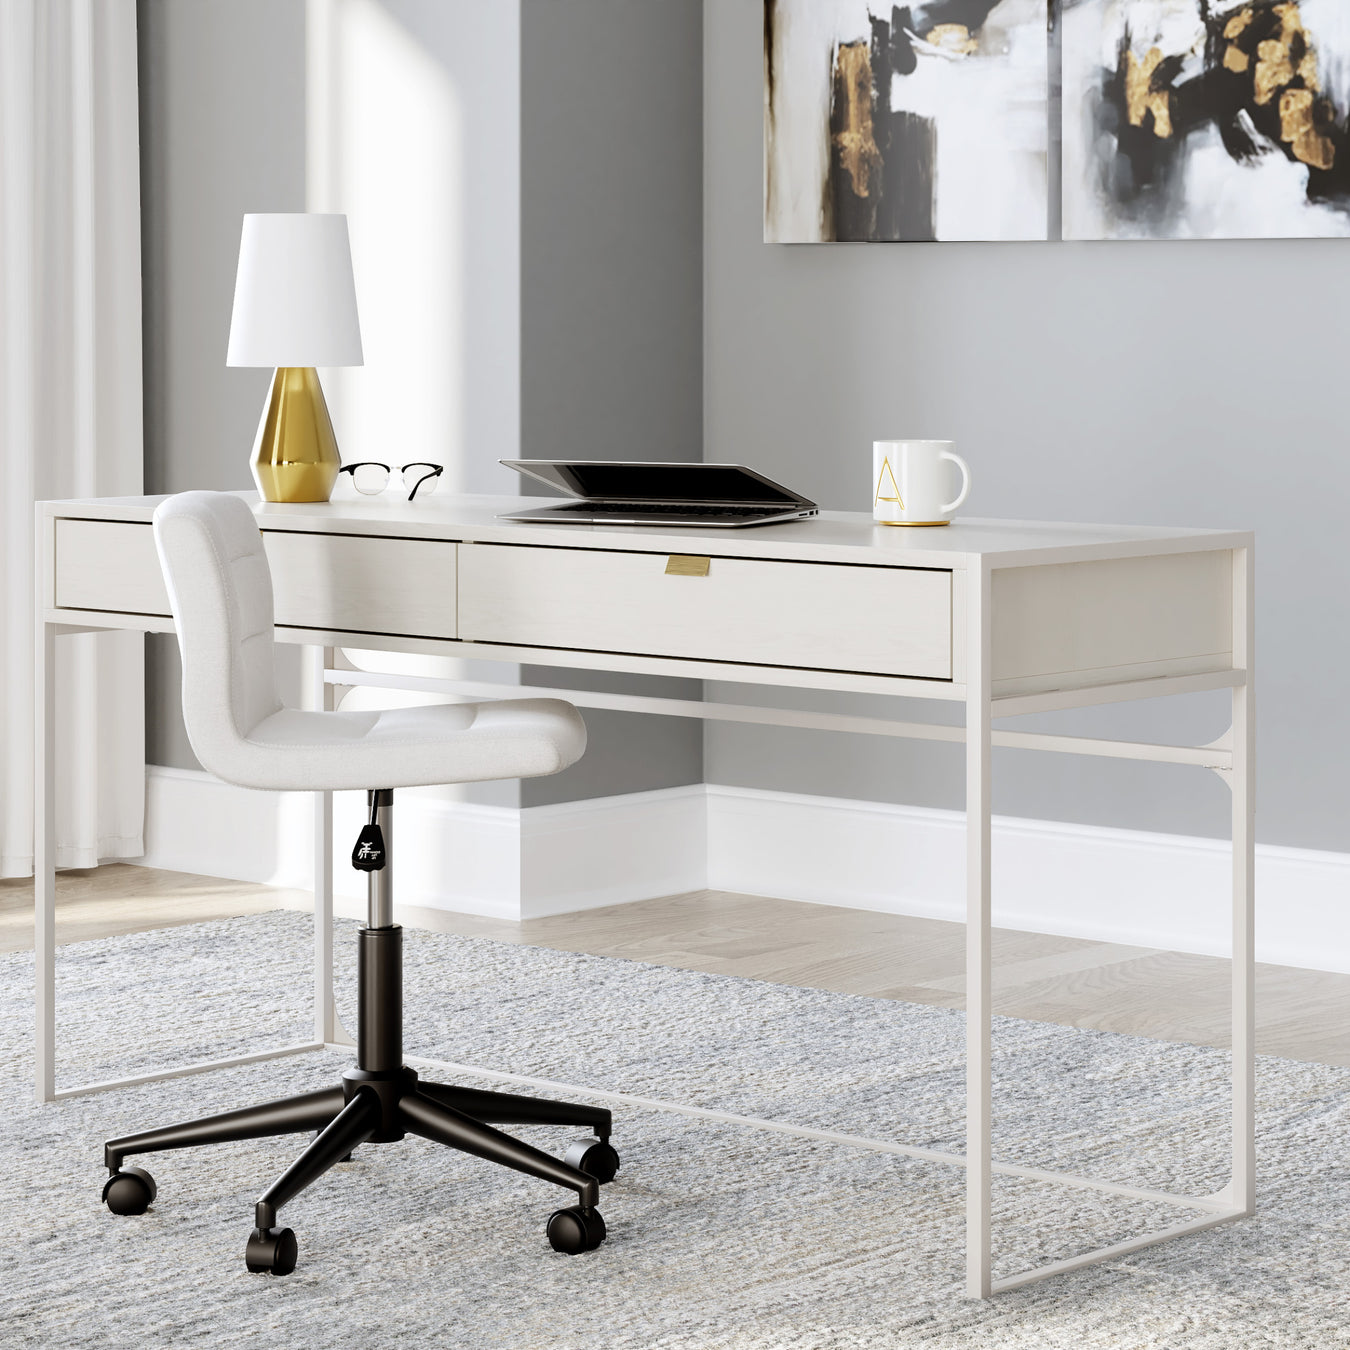 Shop Home Office Furniture at JR Furniture Store in Fayetteville, NC 28311